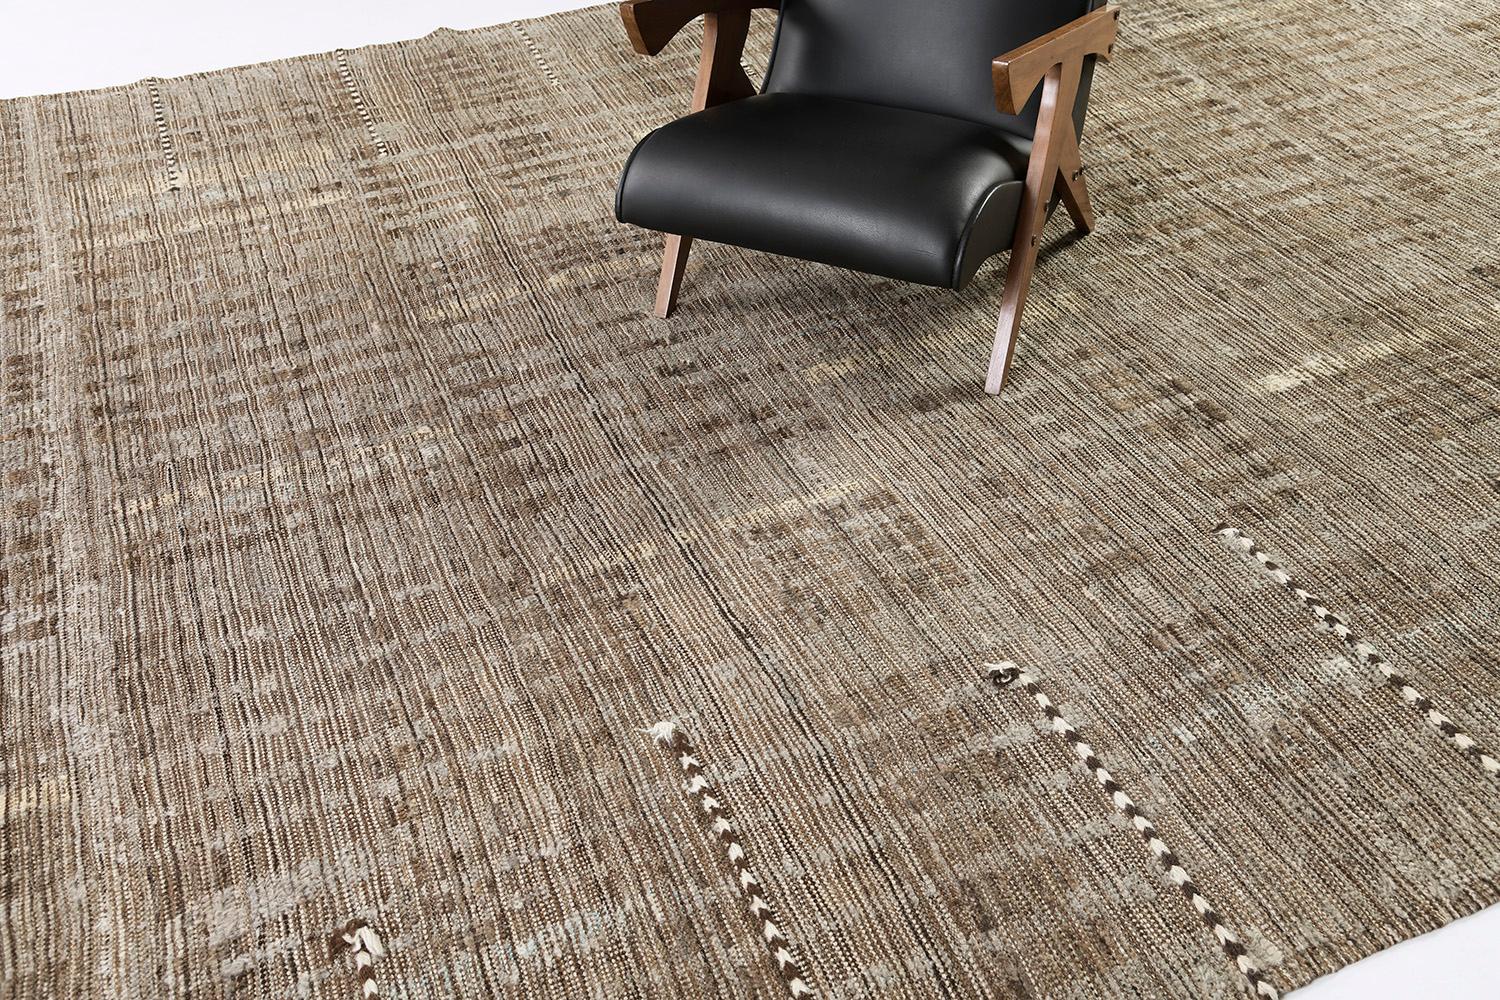 Bacatta uses linework and color to create definition and movement into handwoven wool. Line detailing in neutral tones fascinatingly moves across the rug. Detailed natural flatweave runs around the border with tassels adding an exquisite decorative